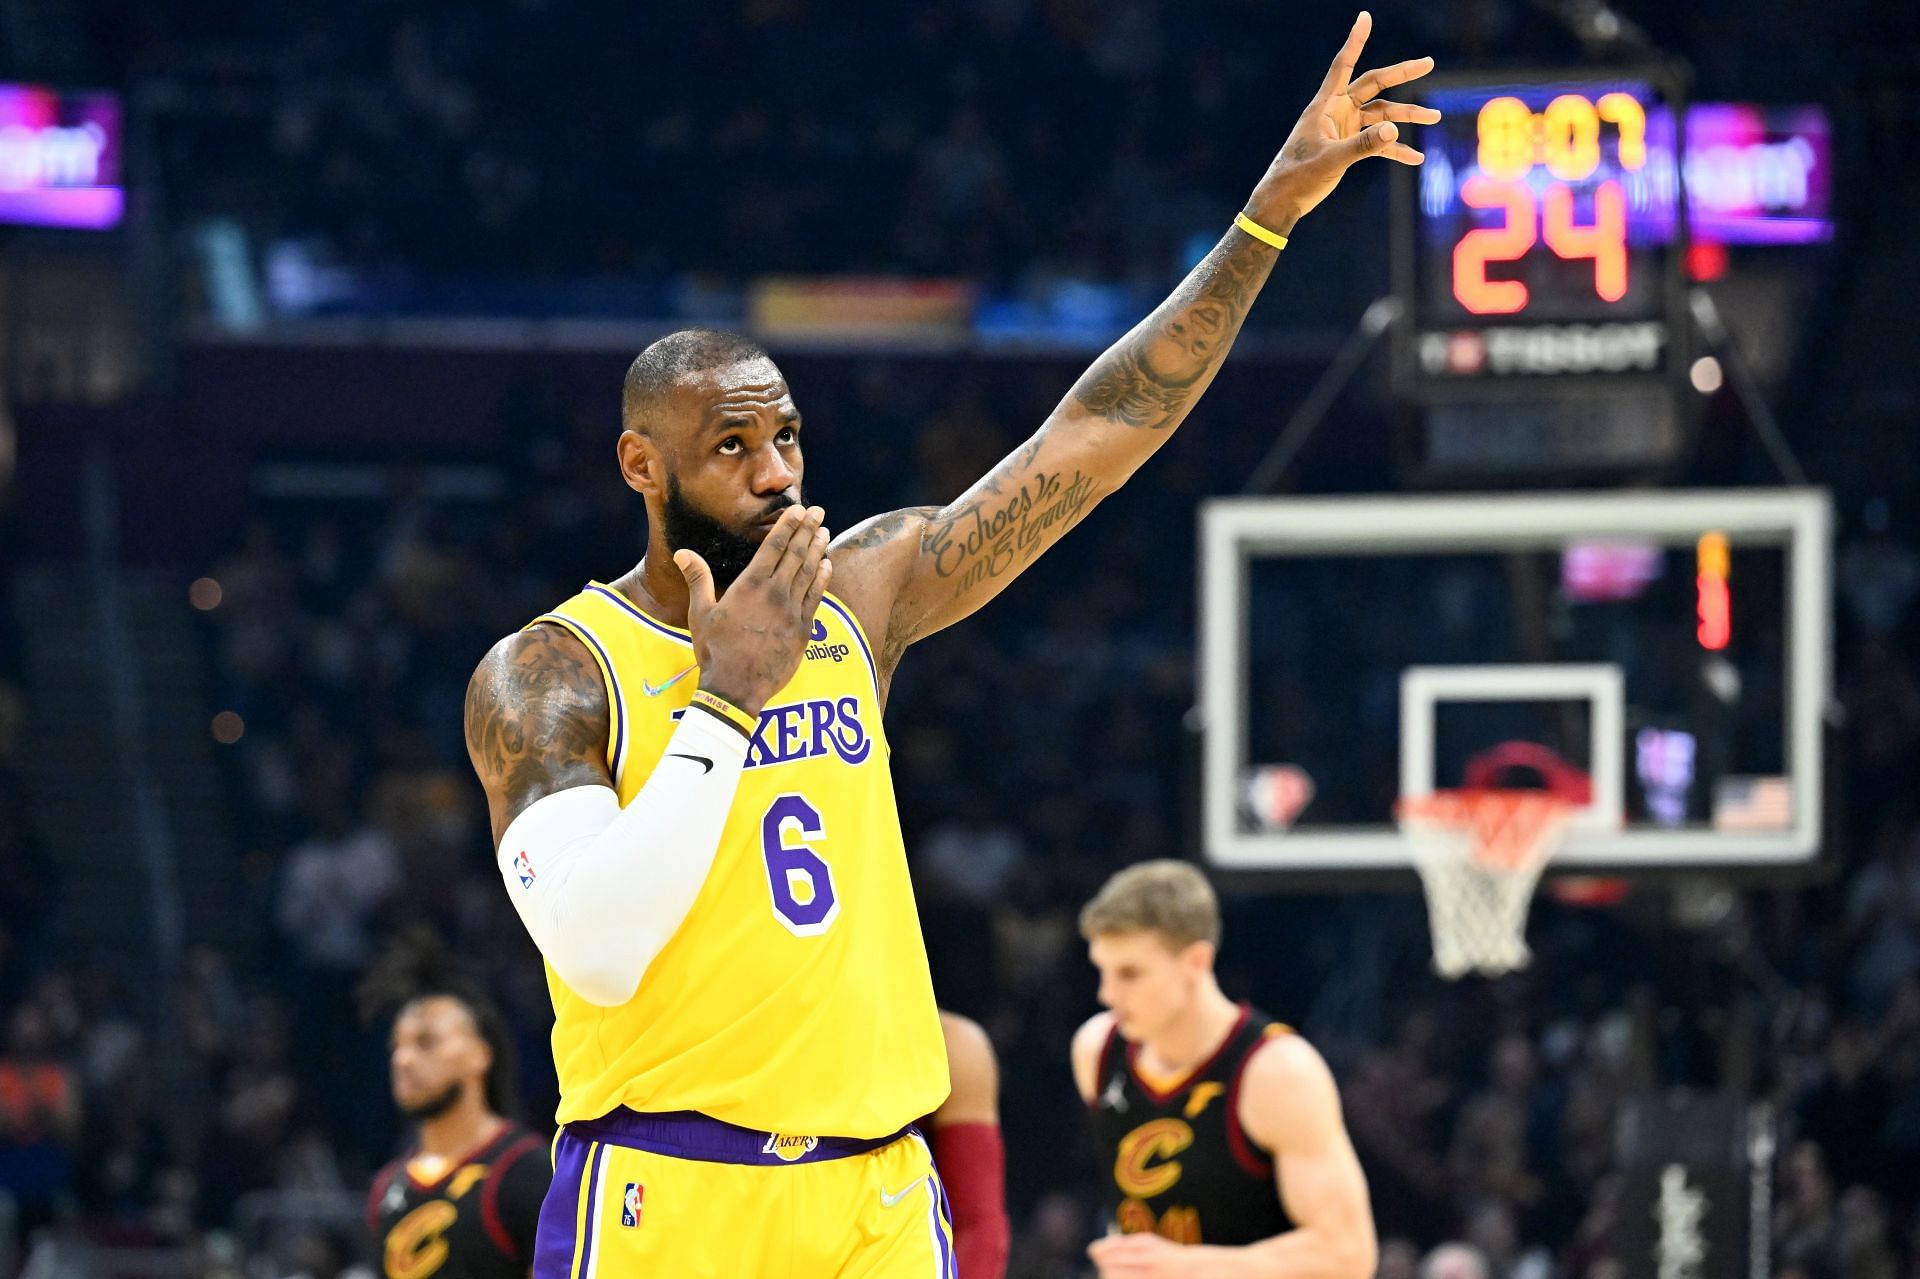 LeBron James of the LA Lakers waves to the crowd during the first quarter against the Cleveland Cavaliers at Rocket Mortgage Fieldhouse on Monday in Cleveland, Ohio.